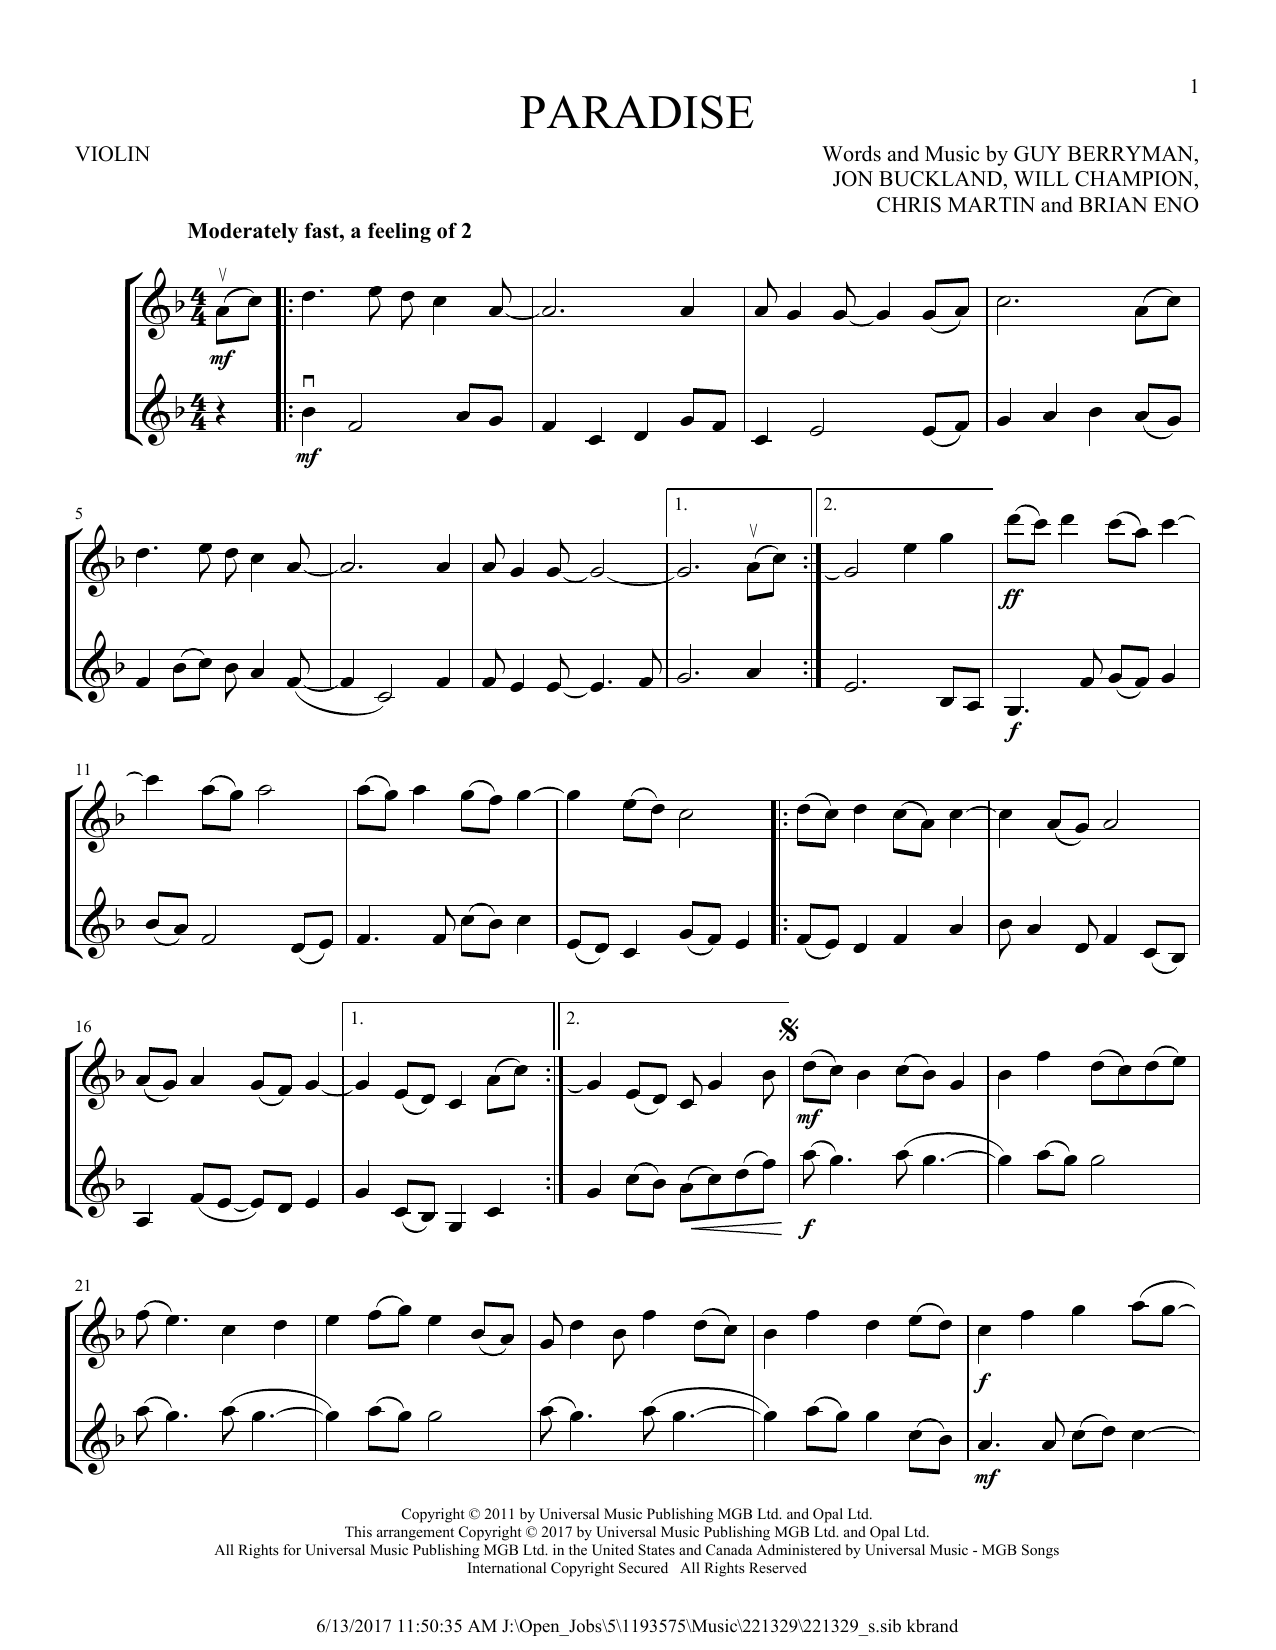 Coldplay "Paradise" Sheet Music Notes, Chords | Drums Download Rock